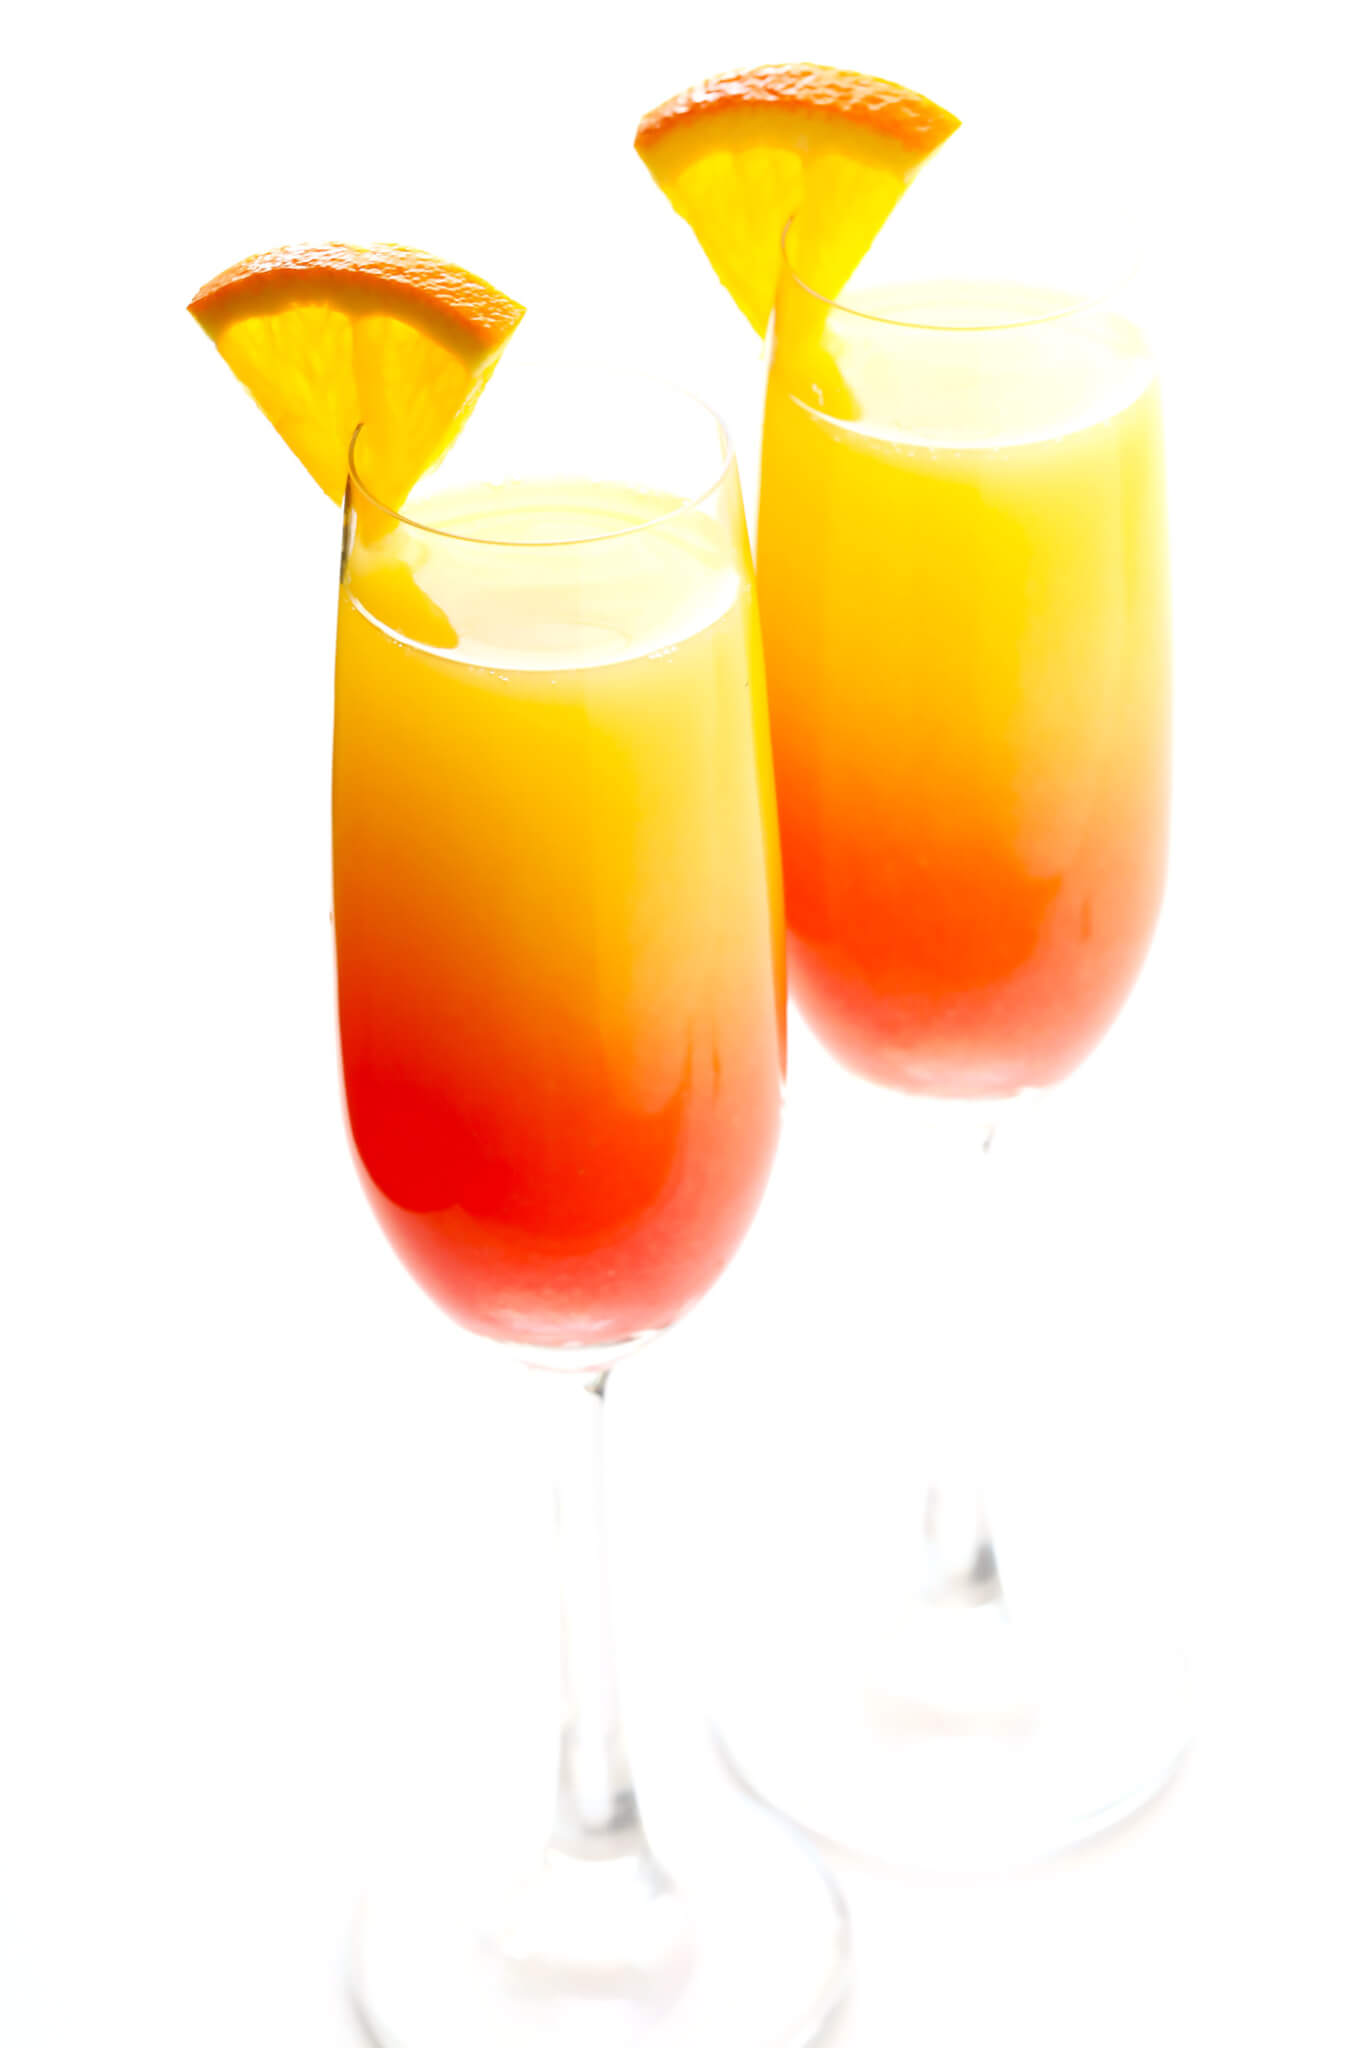 Tequila Sunrise Mimosa Gimme Some Oven,Spicy Grilled Shrimp Recipe